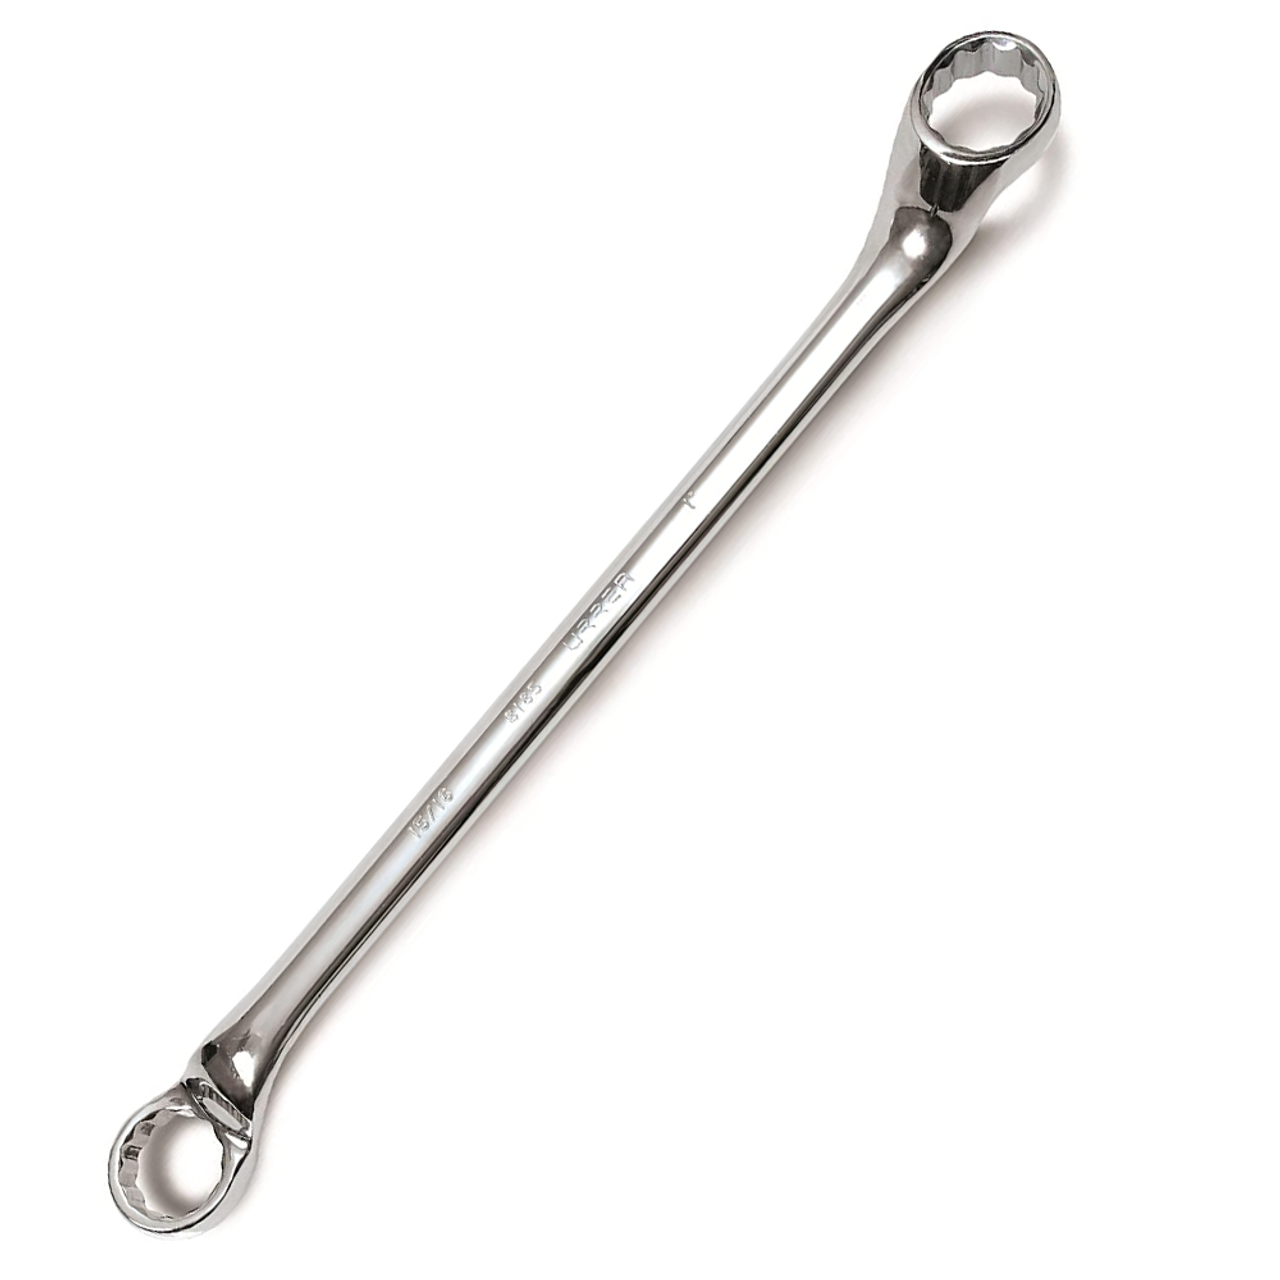 Full polished  45 Degree Box-End wrench, Size: 10 x11 mm,12 Point ,Total Length: 7-3/4"